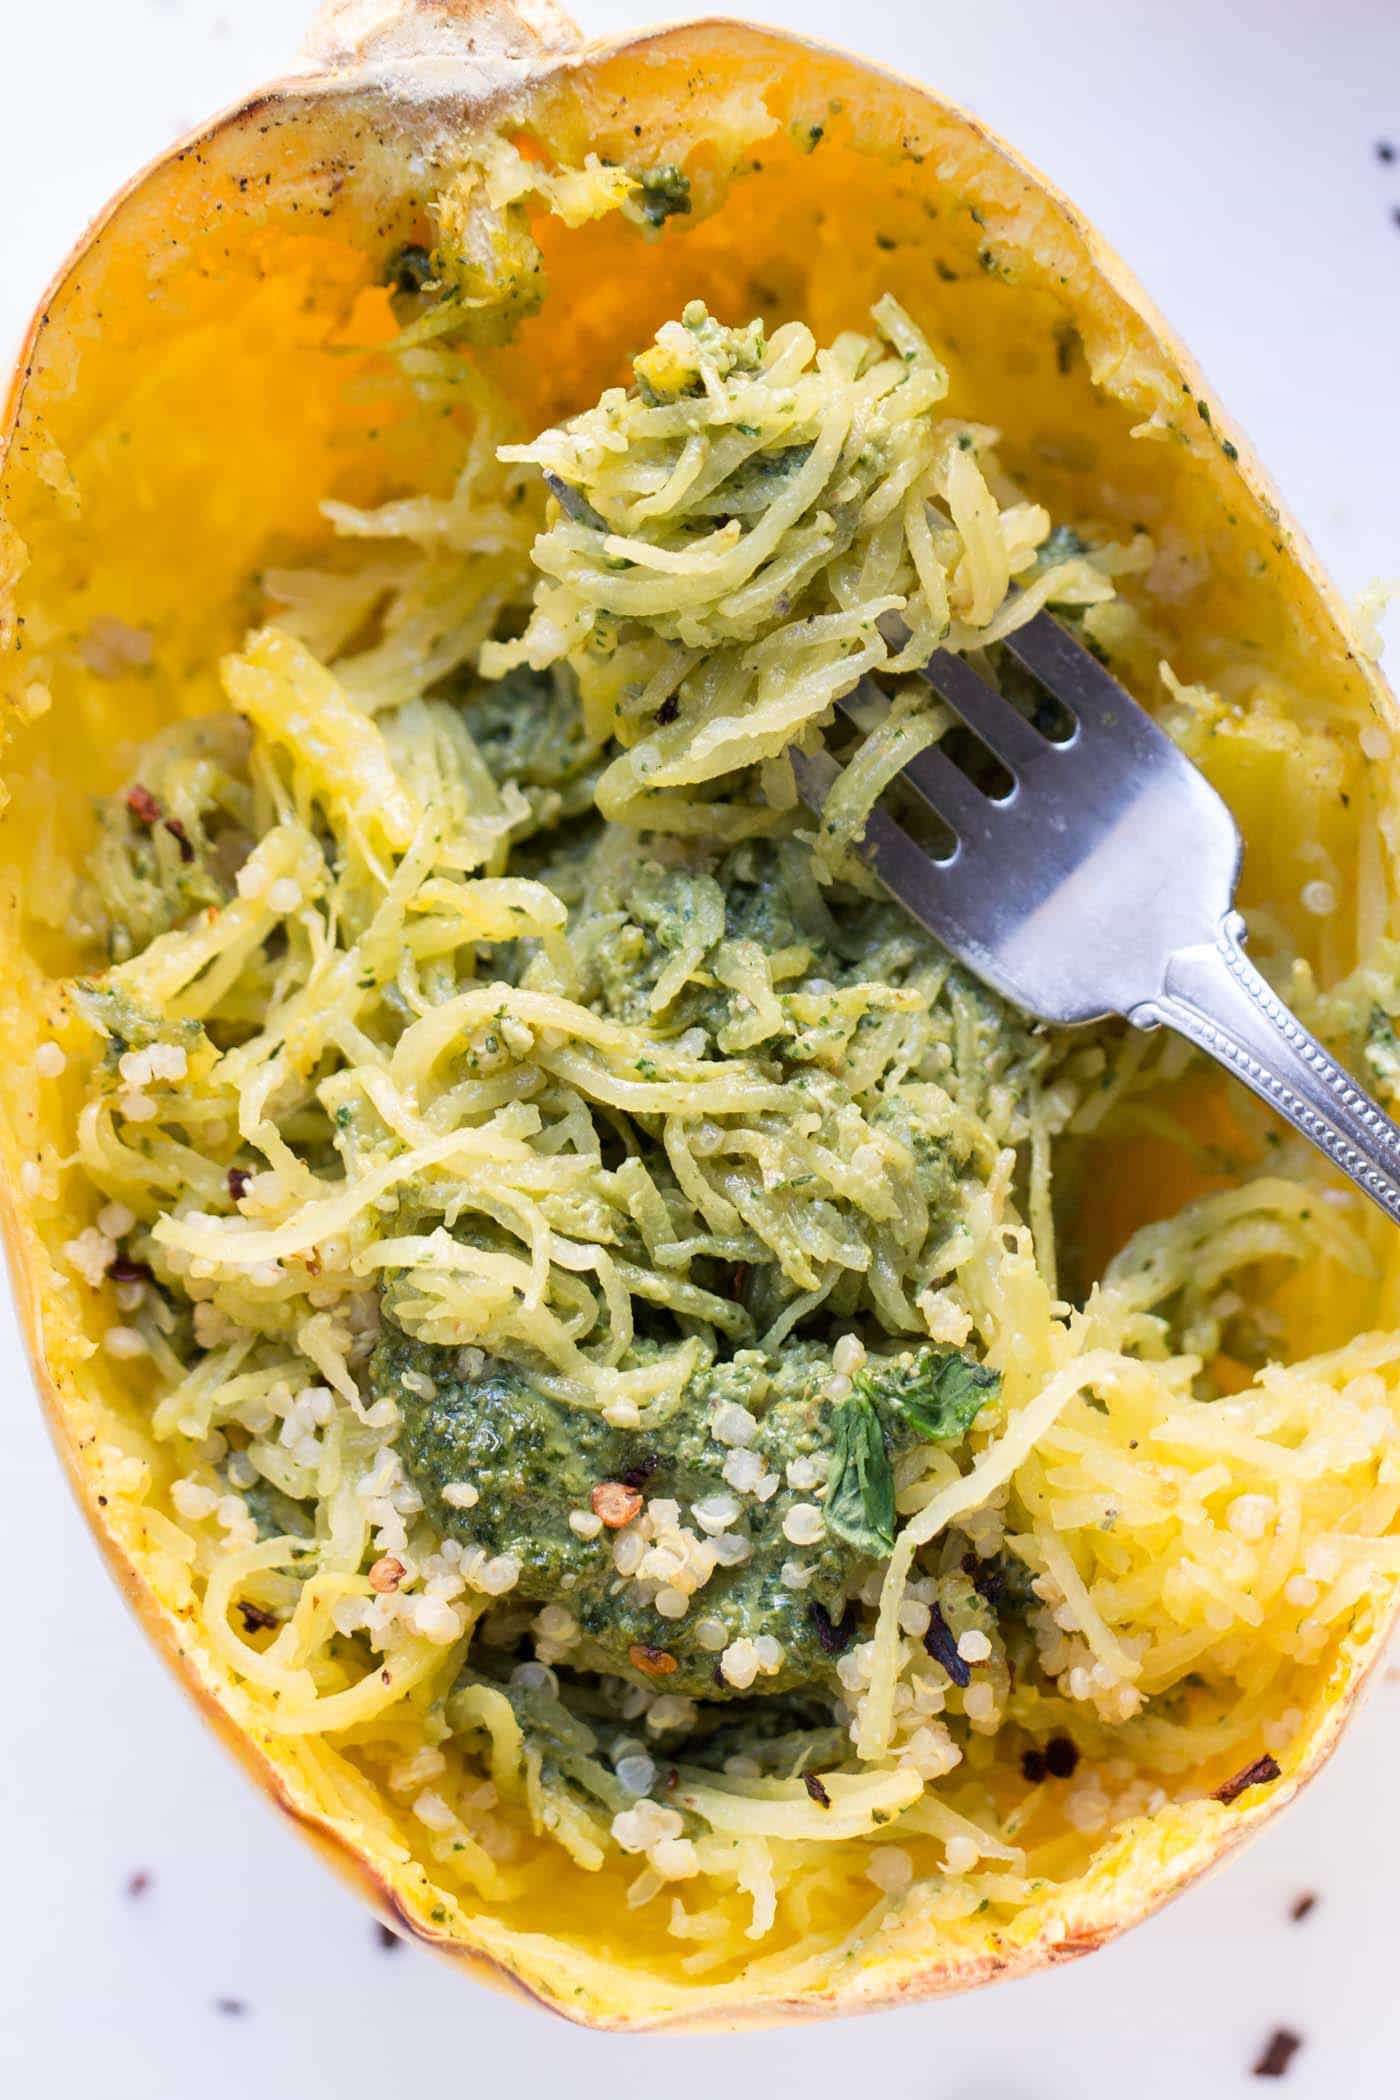 5-ingredient Pesto Spaghetti Squash - packed with protein and perfect for those of us who love pasta but don't want all those empty carbs and calories!